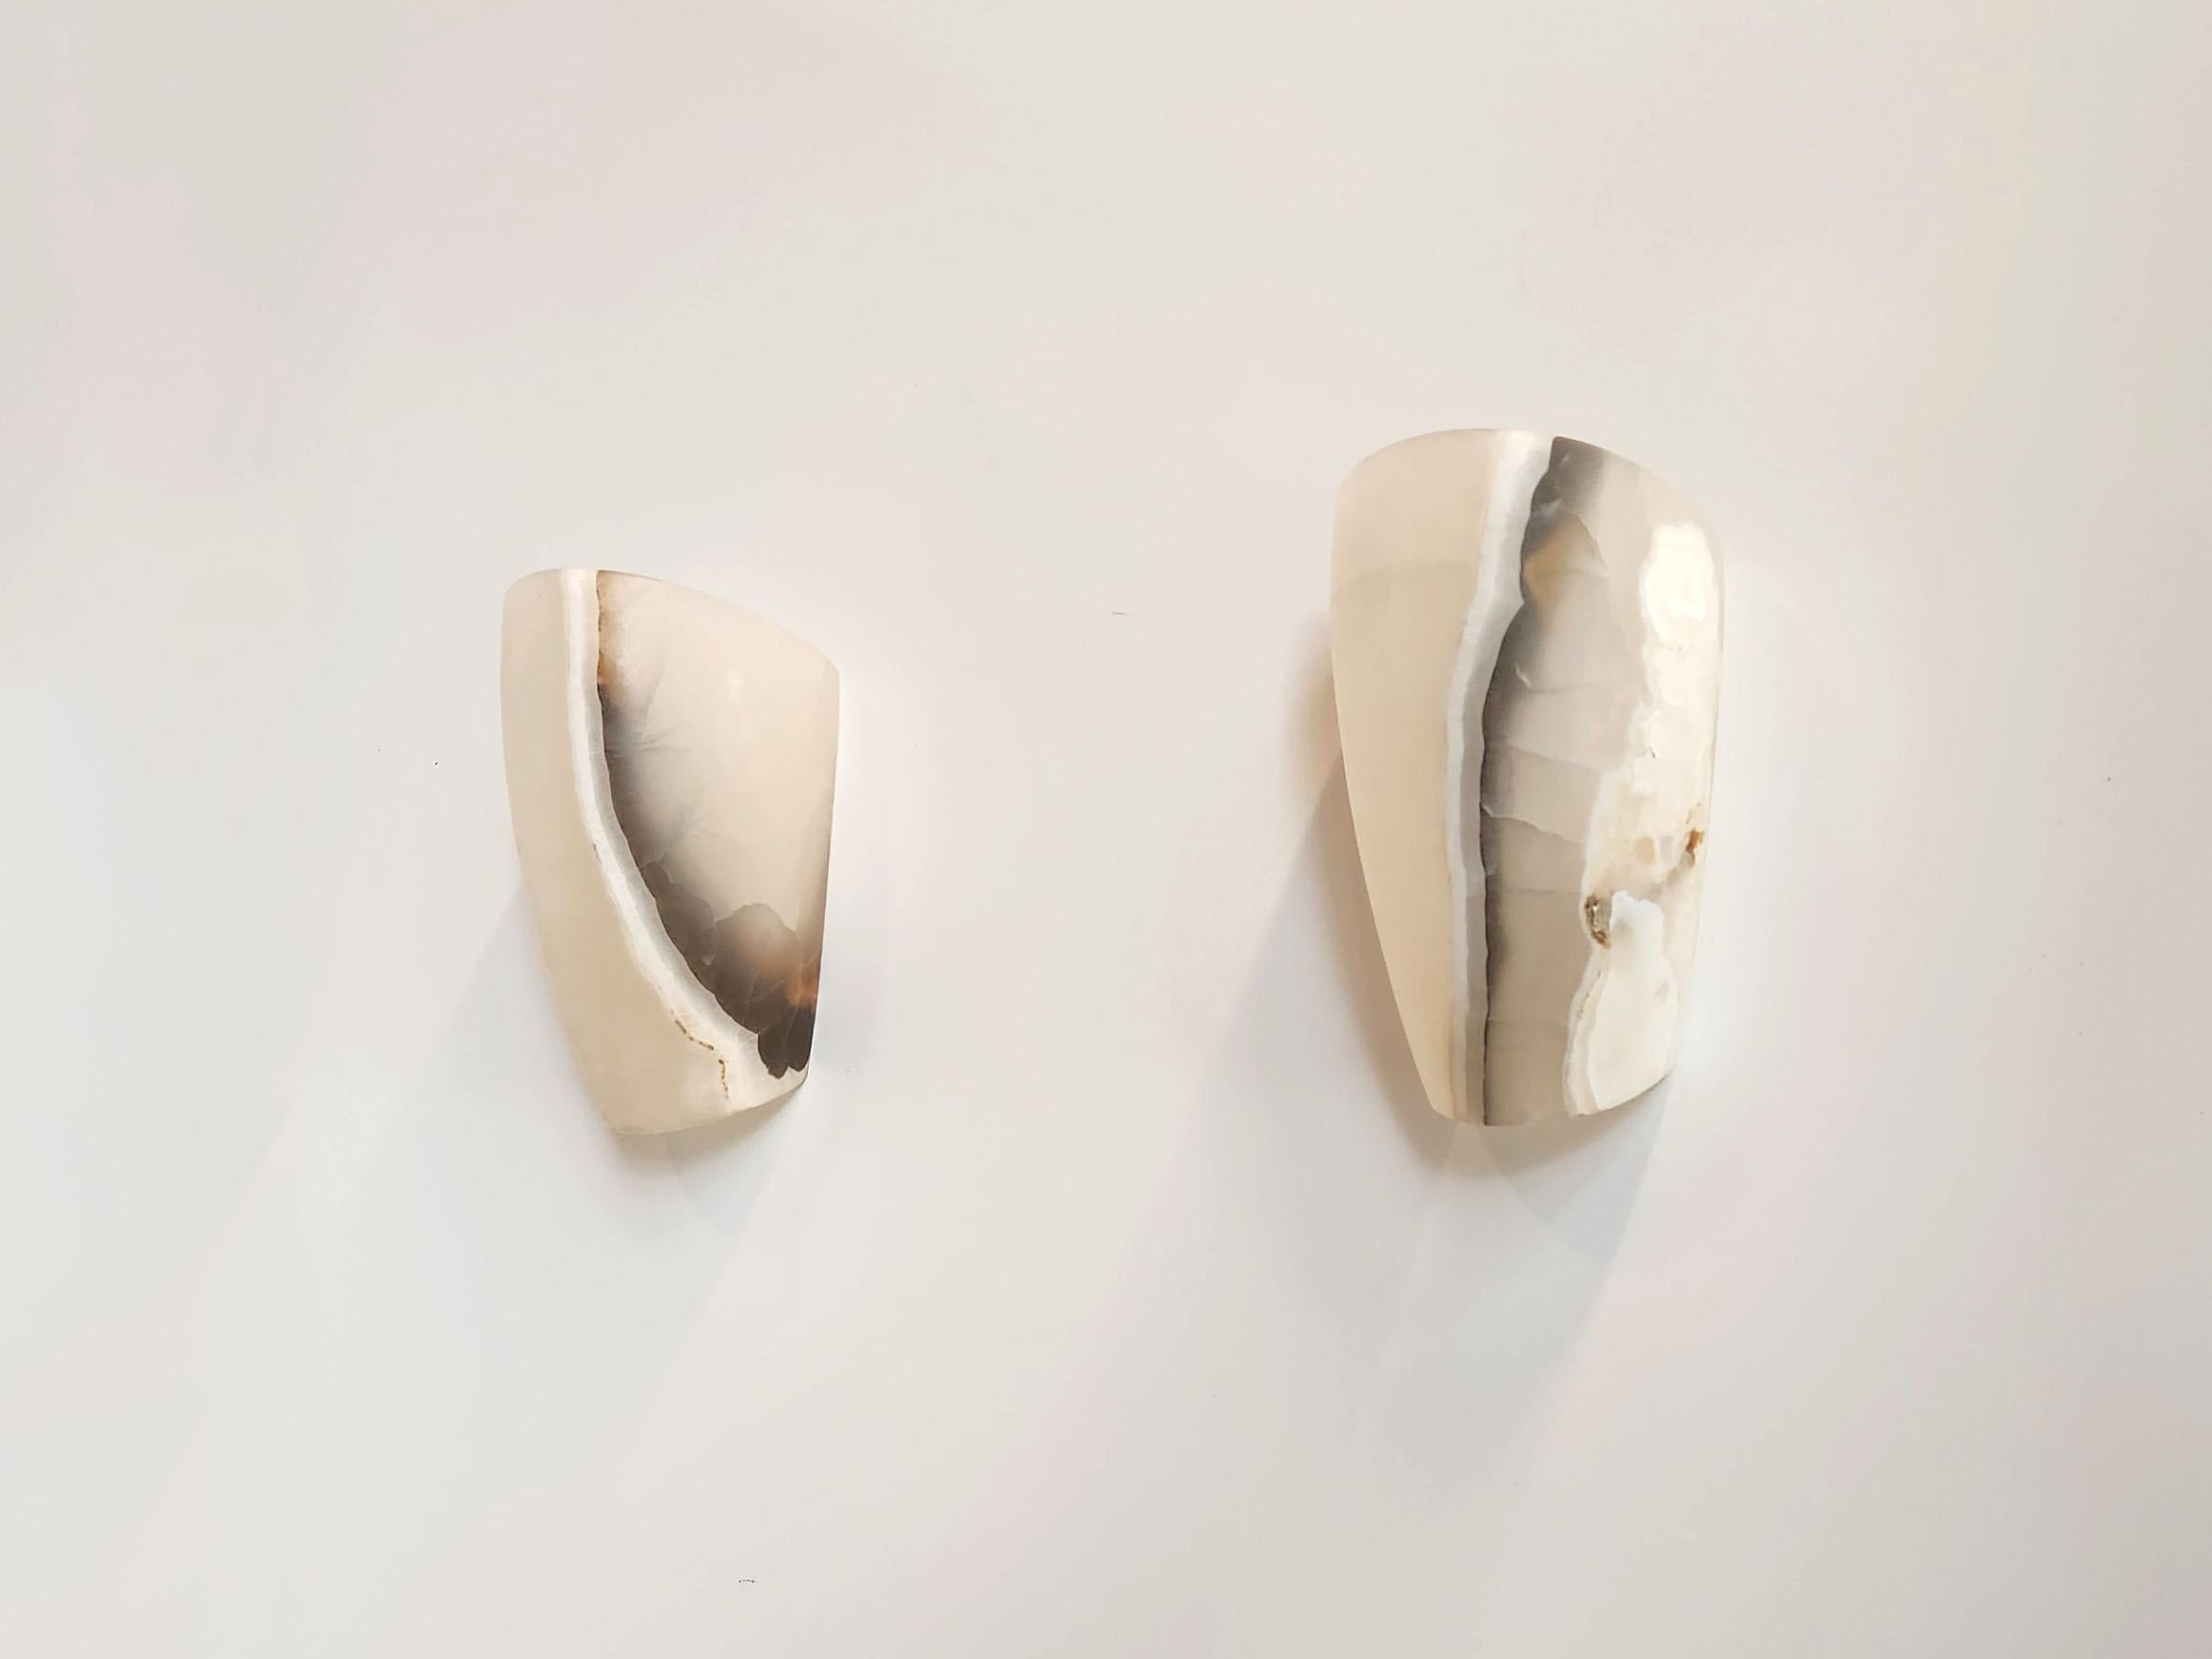 Hand-carved White Onyx Wall Sconces with Natural Dark Veins For Sale 2